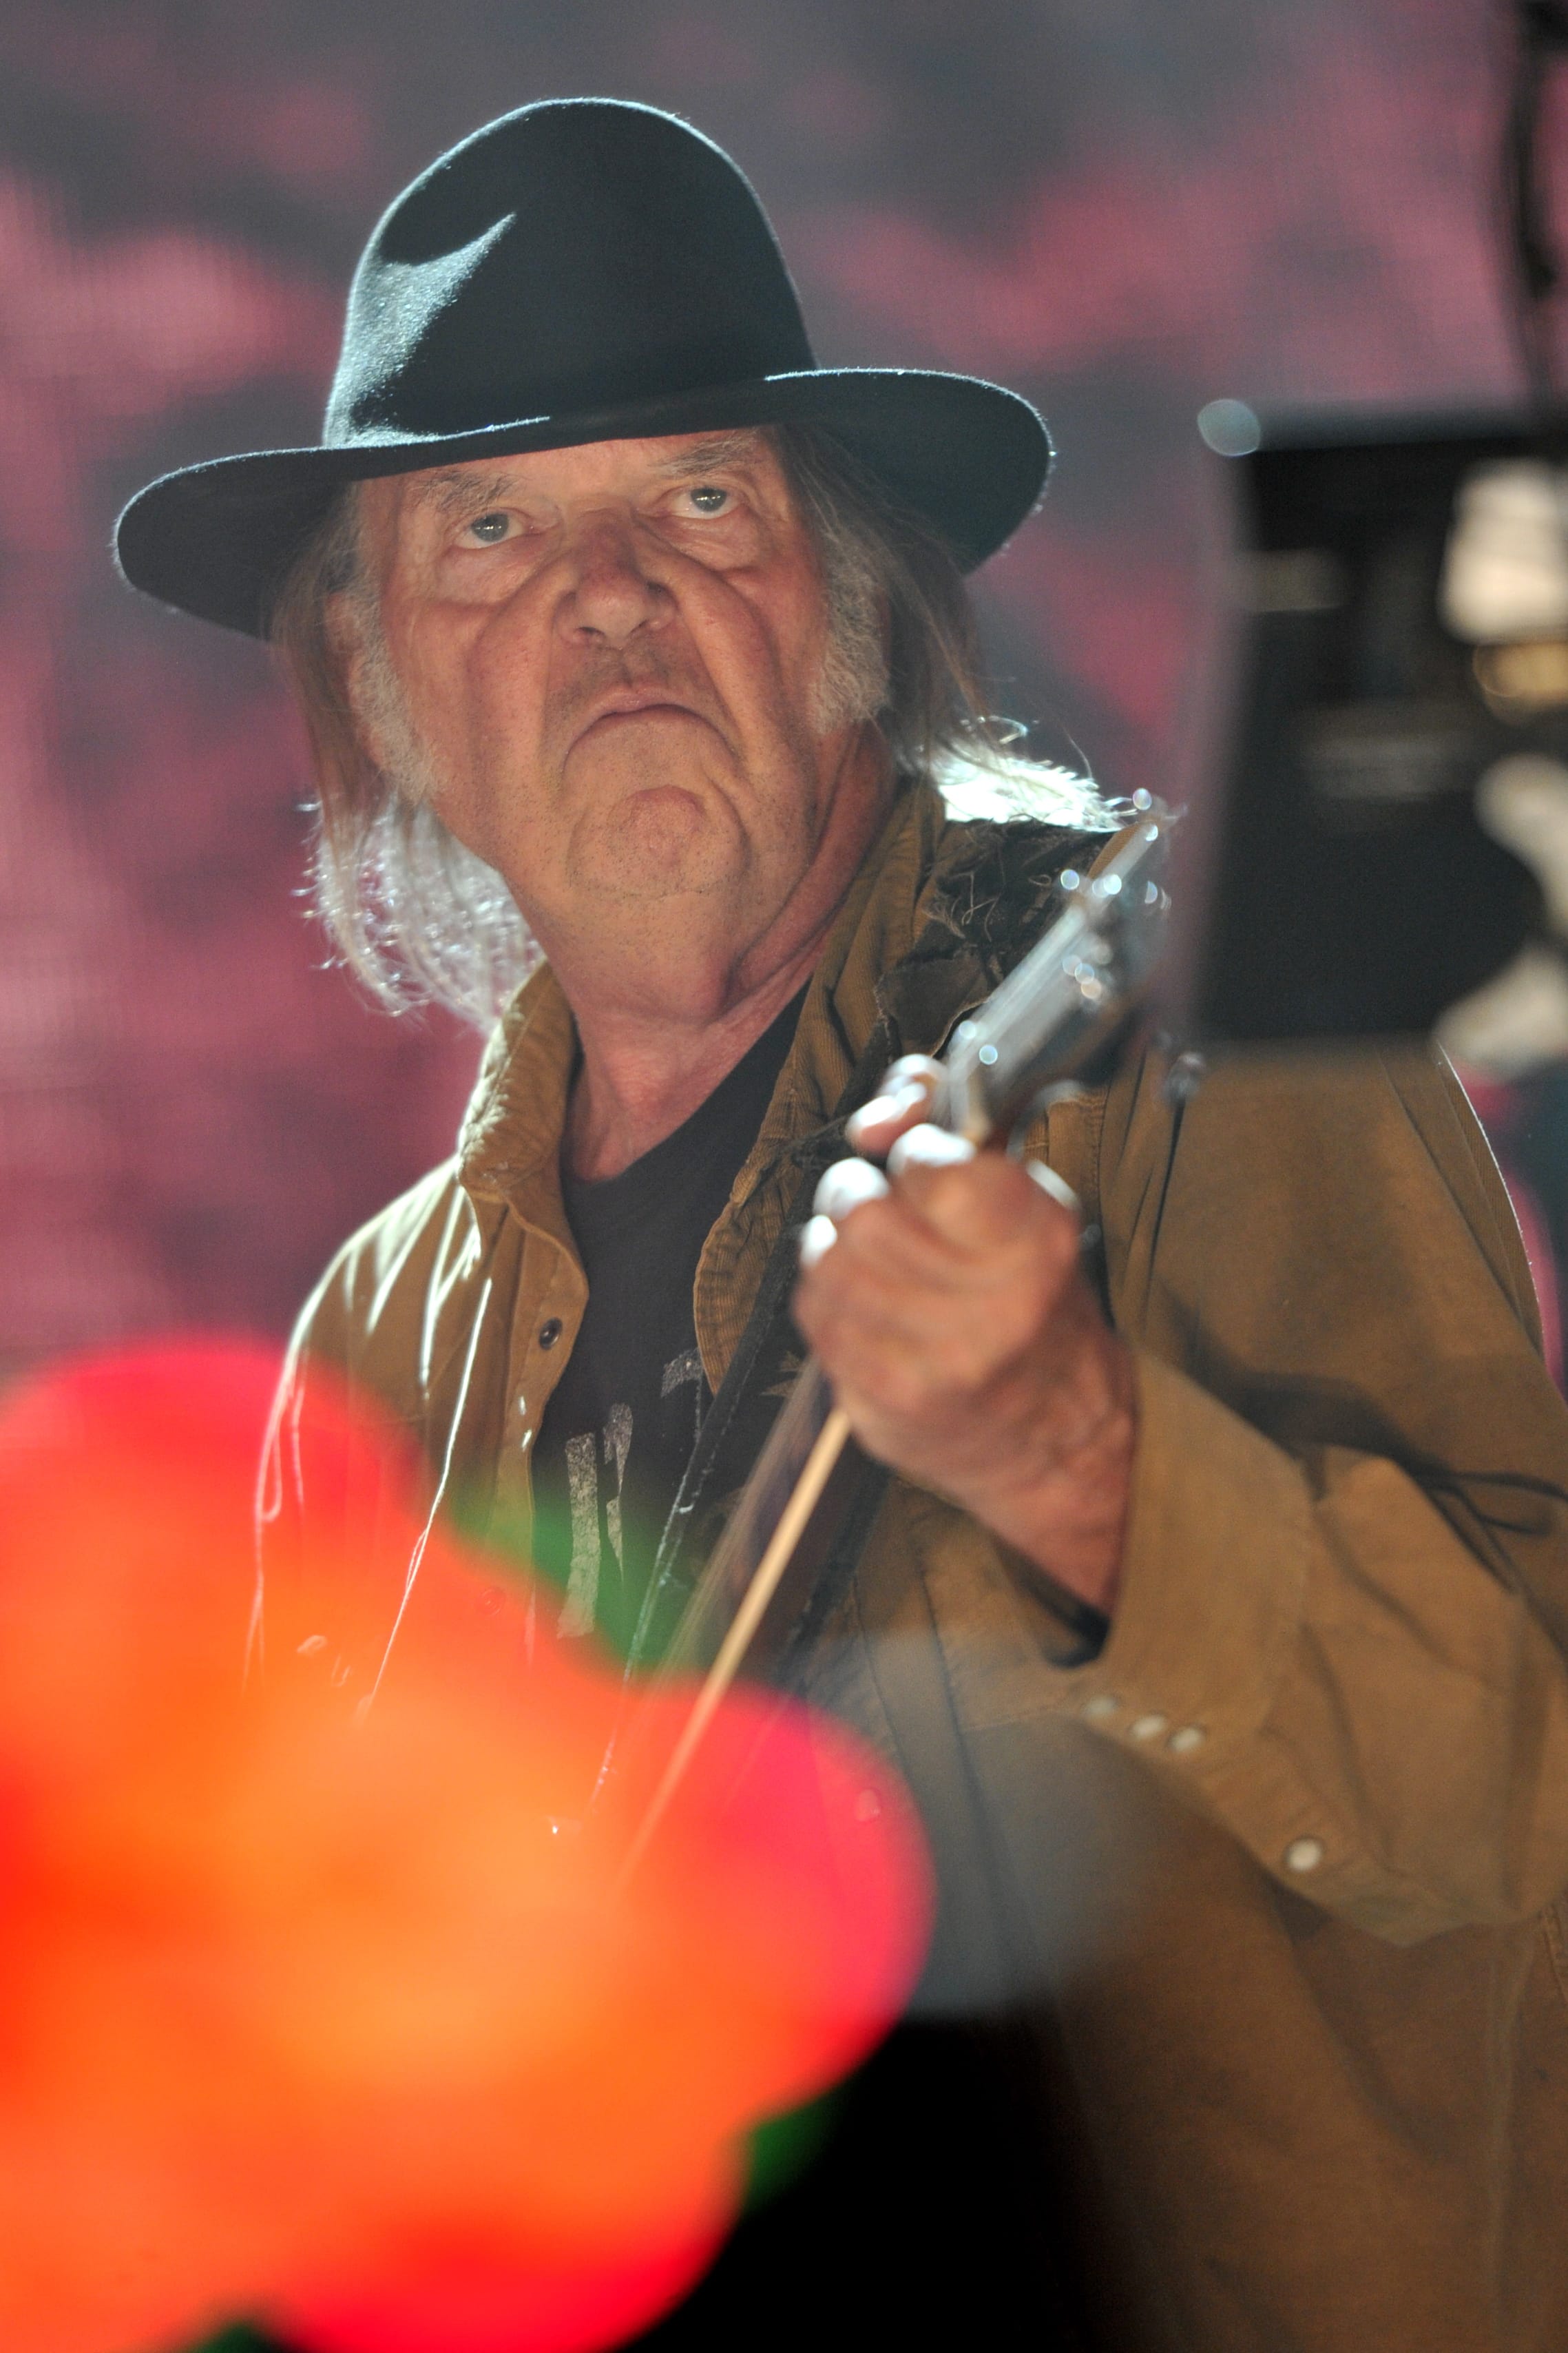 Neil Young performs at Farm Aid 30 at FirstMerit Bank Pavilion at Northerly Island on Saturday in Chicago.